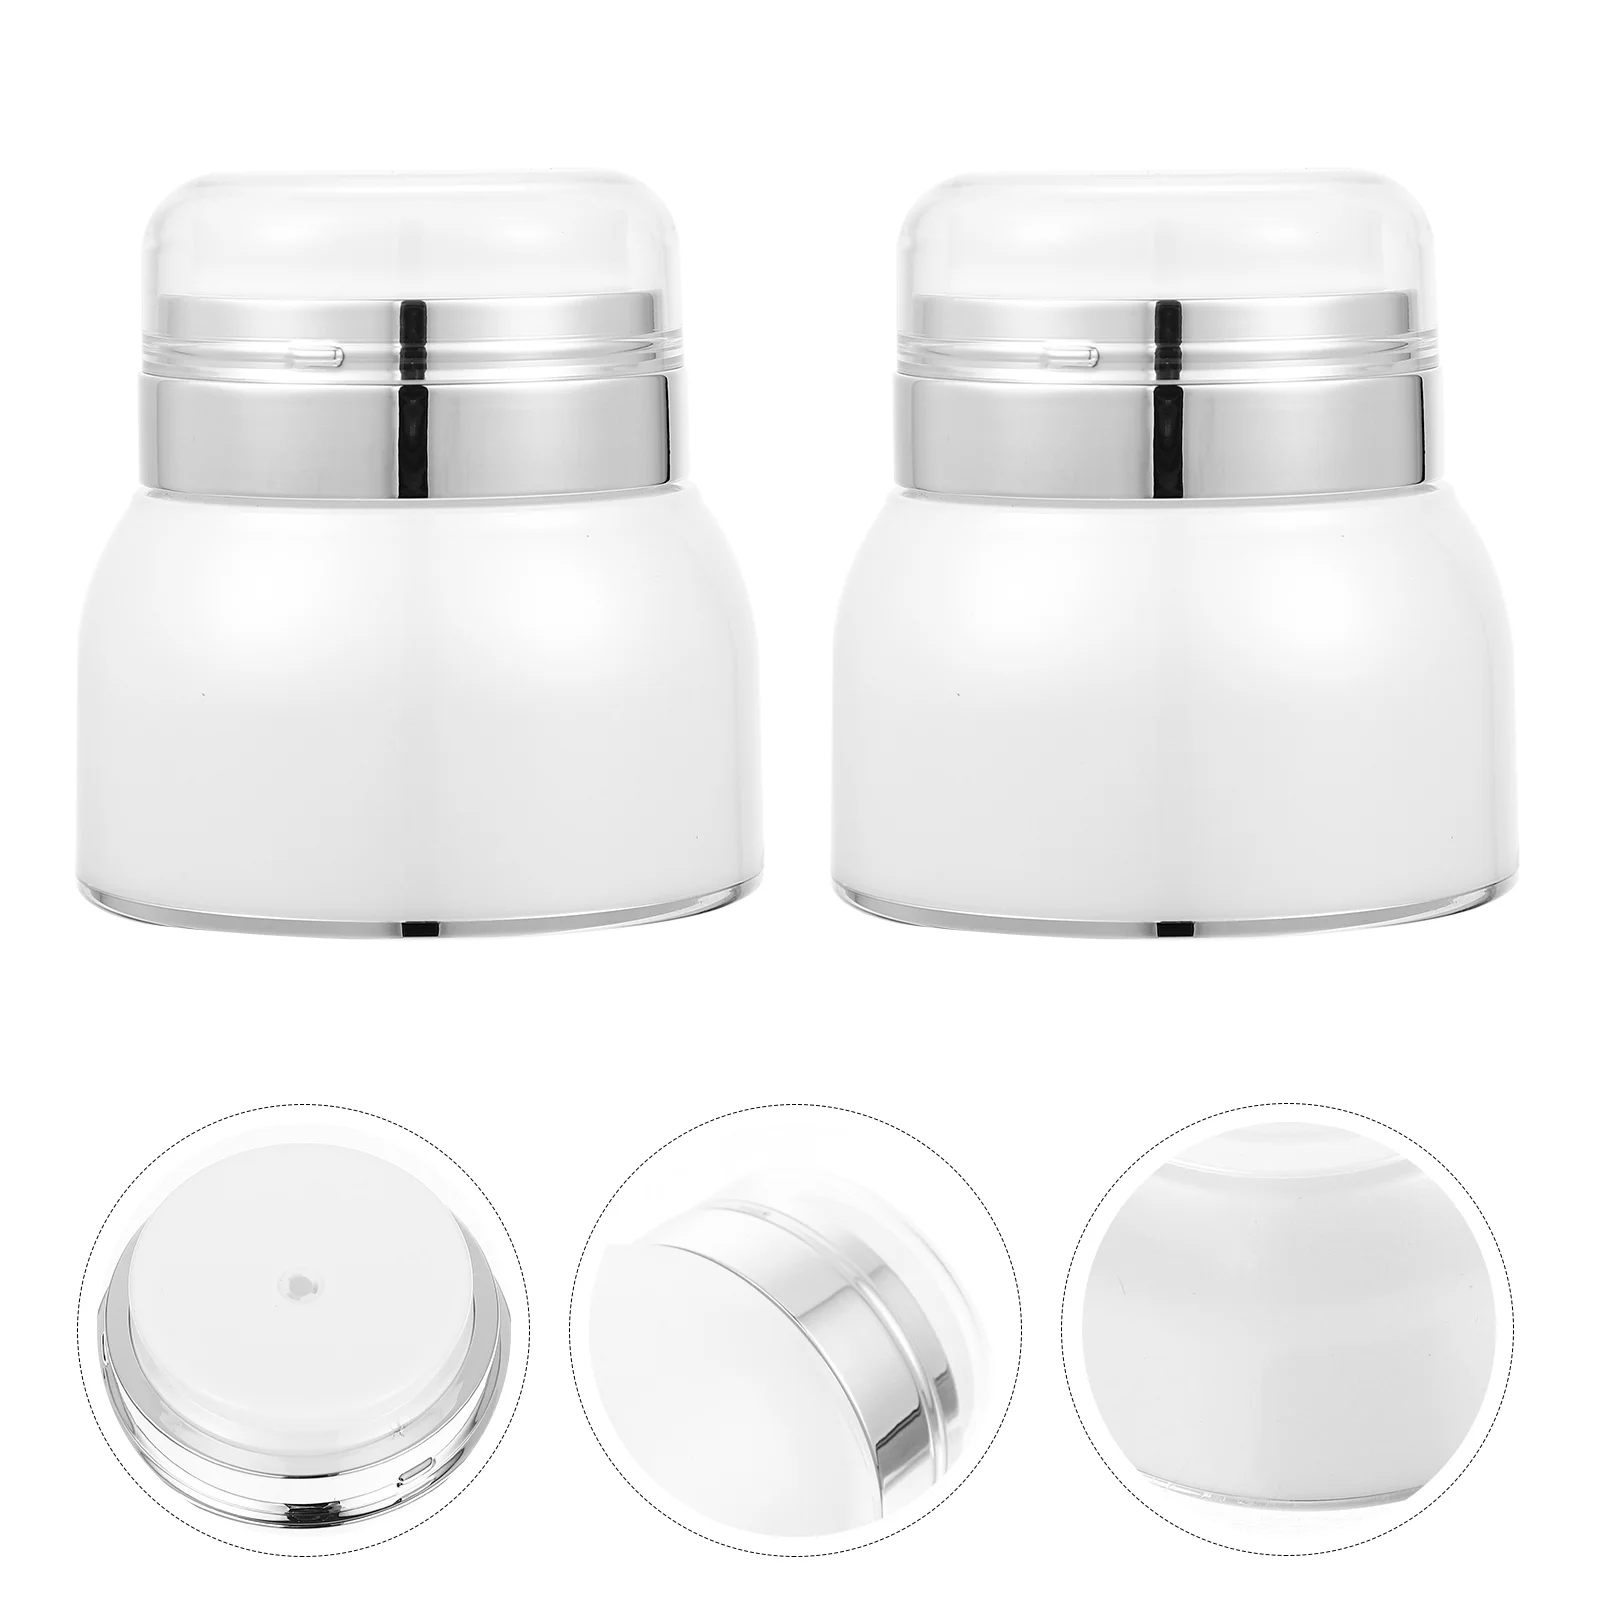 2 Pcs Cream Bottle Pressing Type Airless Pump Bottles Multipurpose Travel Toiletries Leakproof Sub Container Empty Lotion